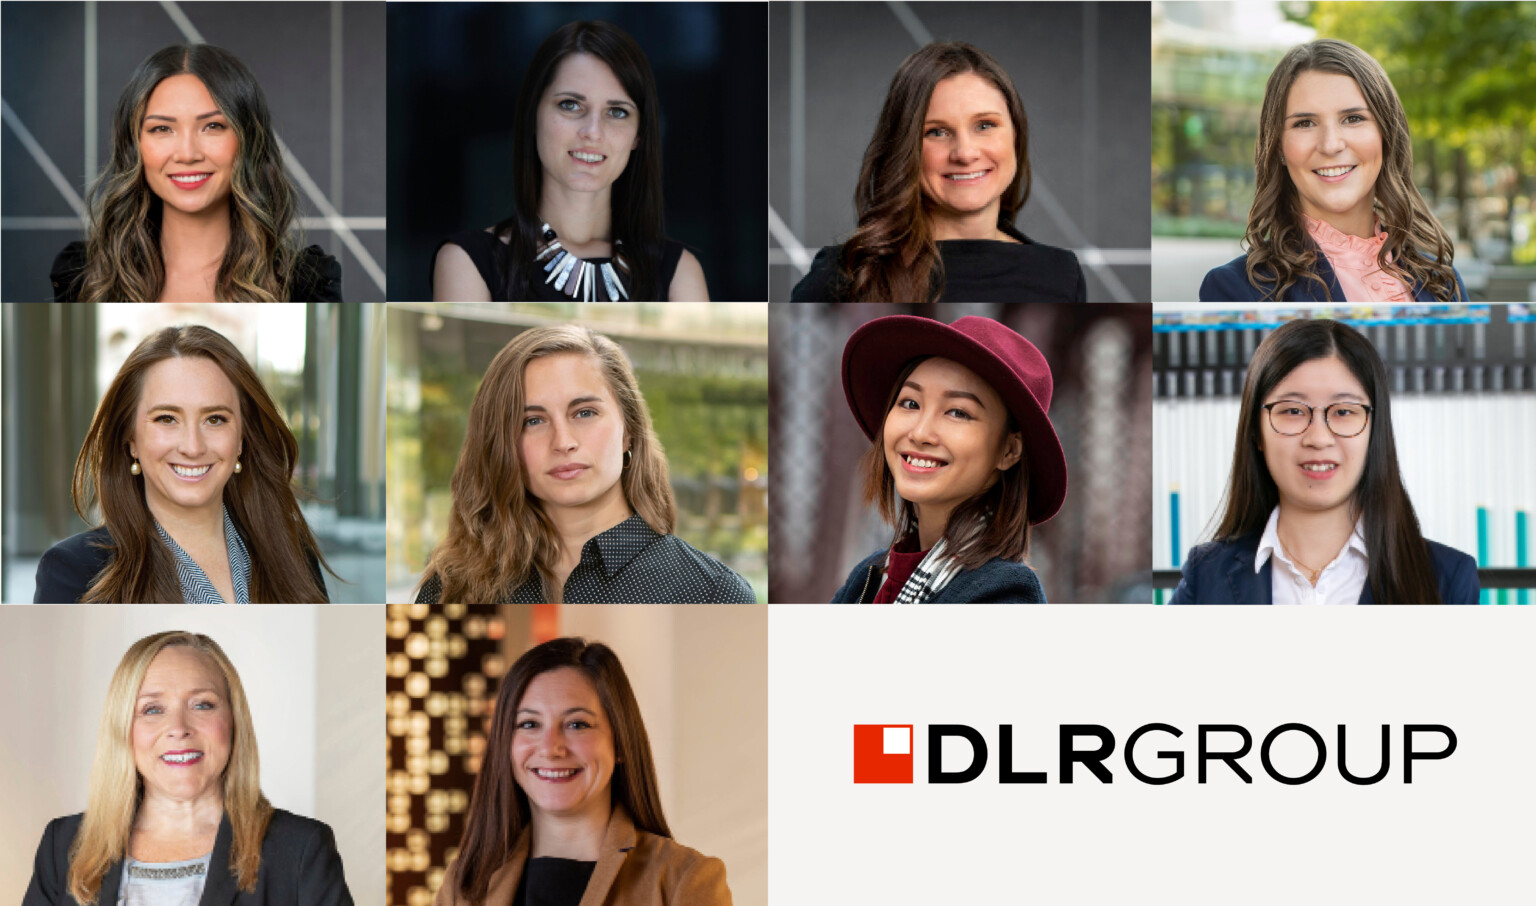 grid of influential women in design at DLR Group